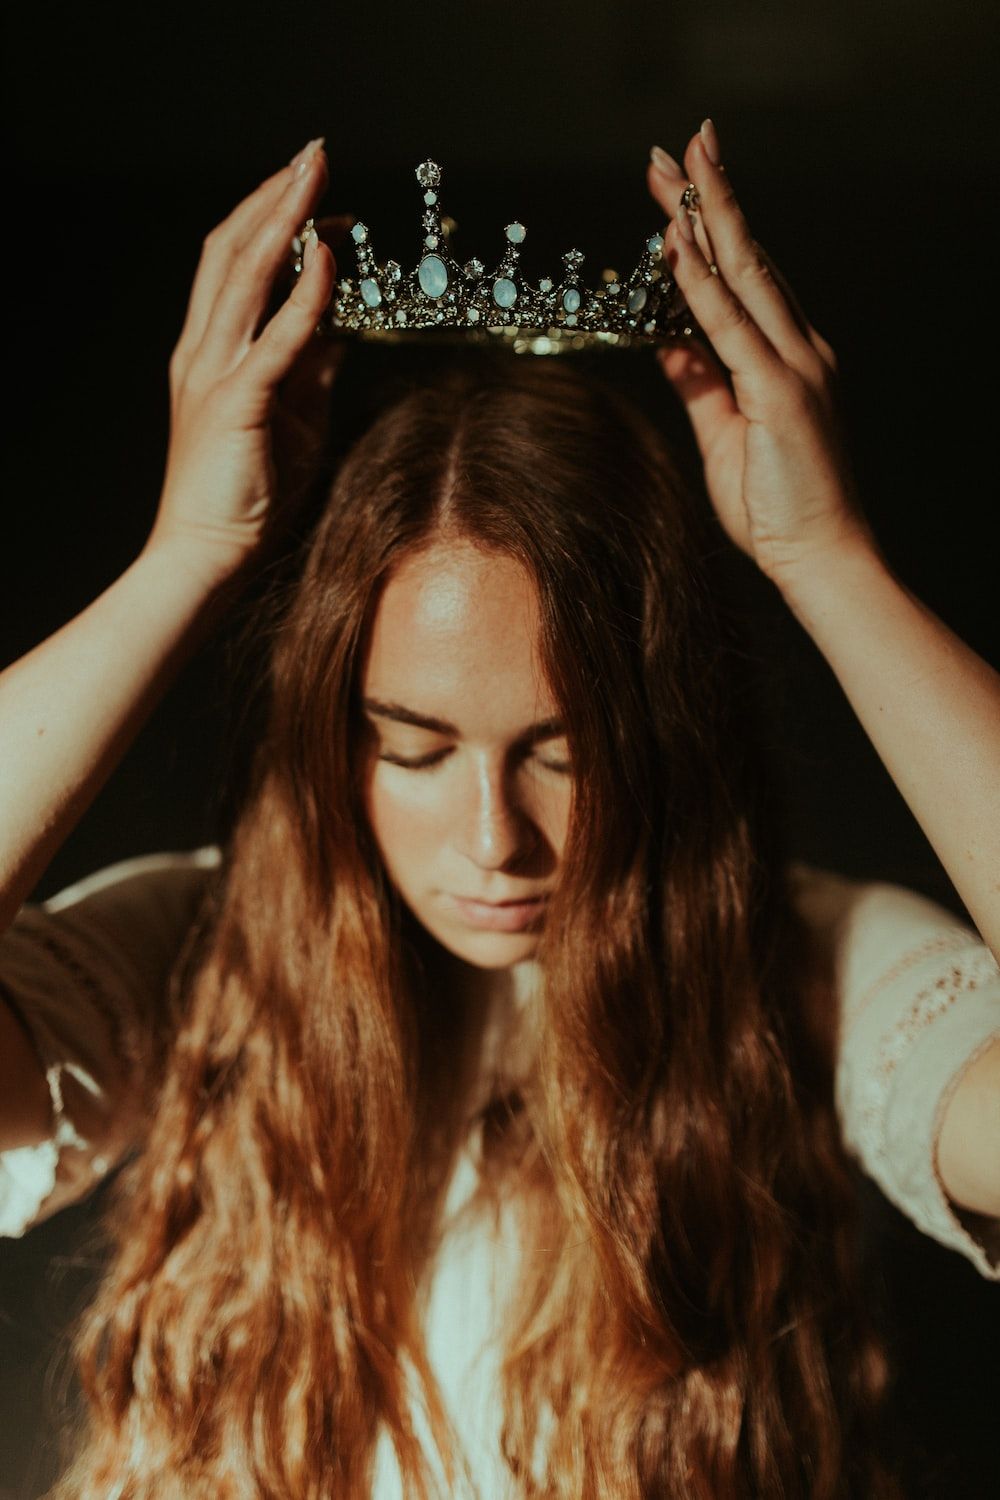 A woman with long hair holding up her head - Crown